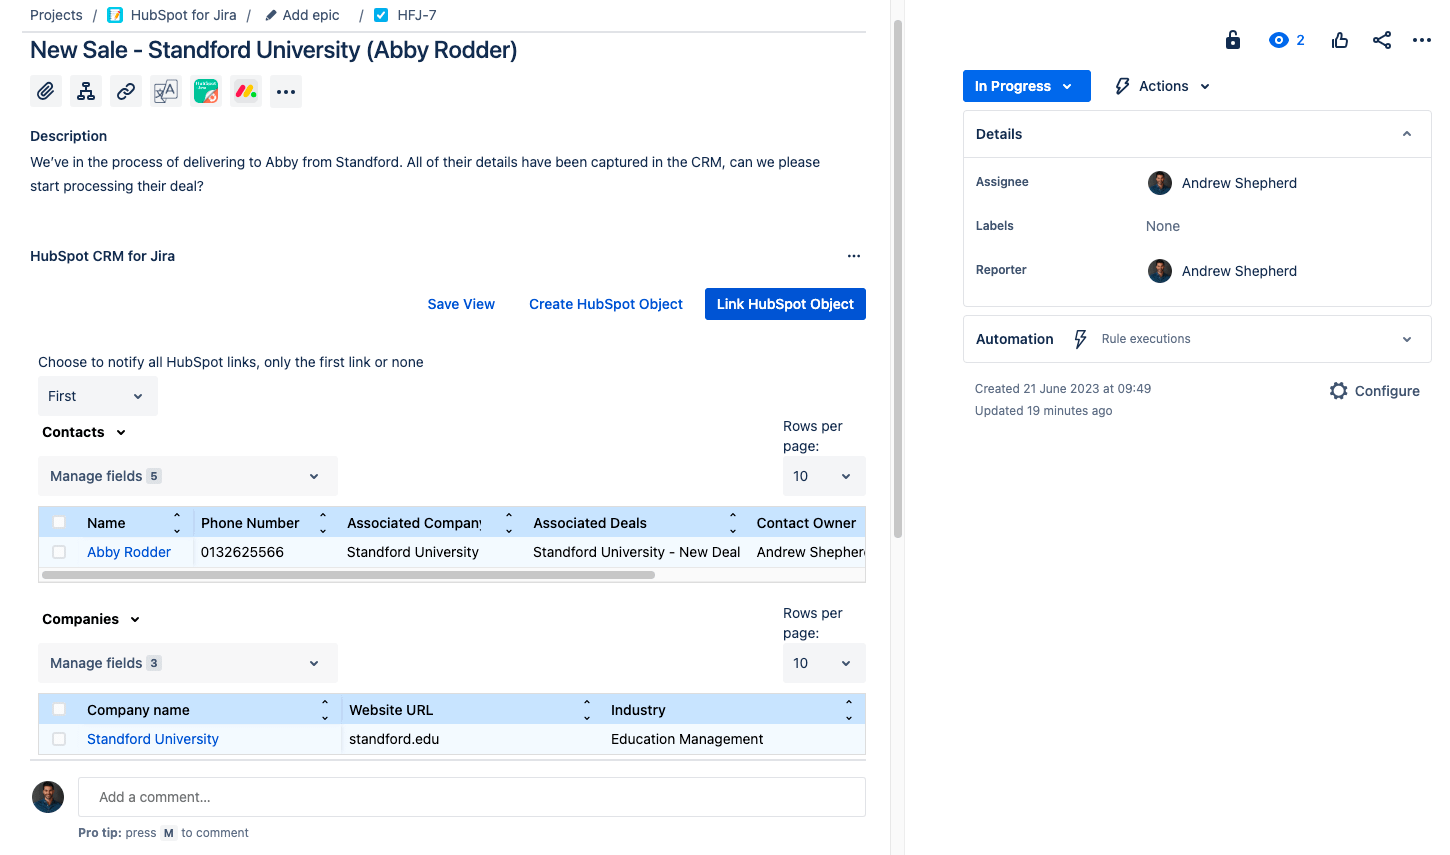 A Jira ticket linked to HubSpot contacts and companies